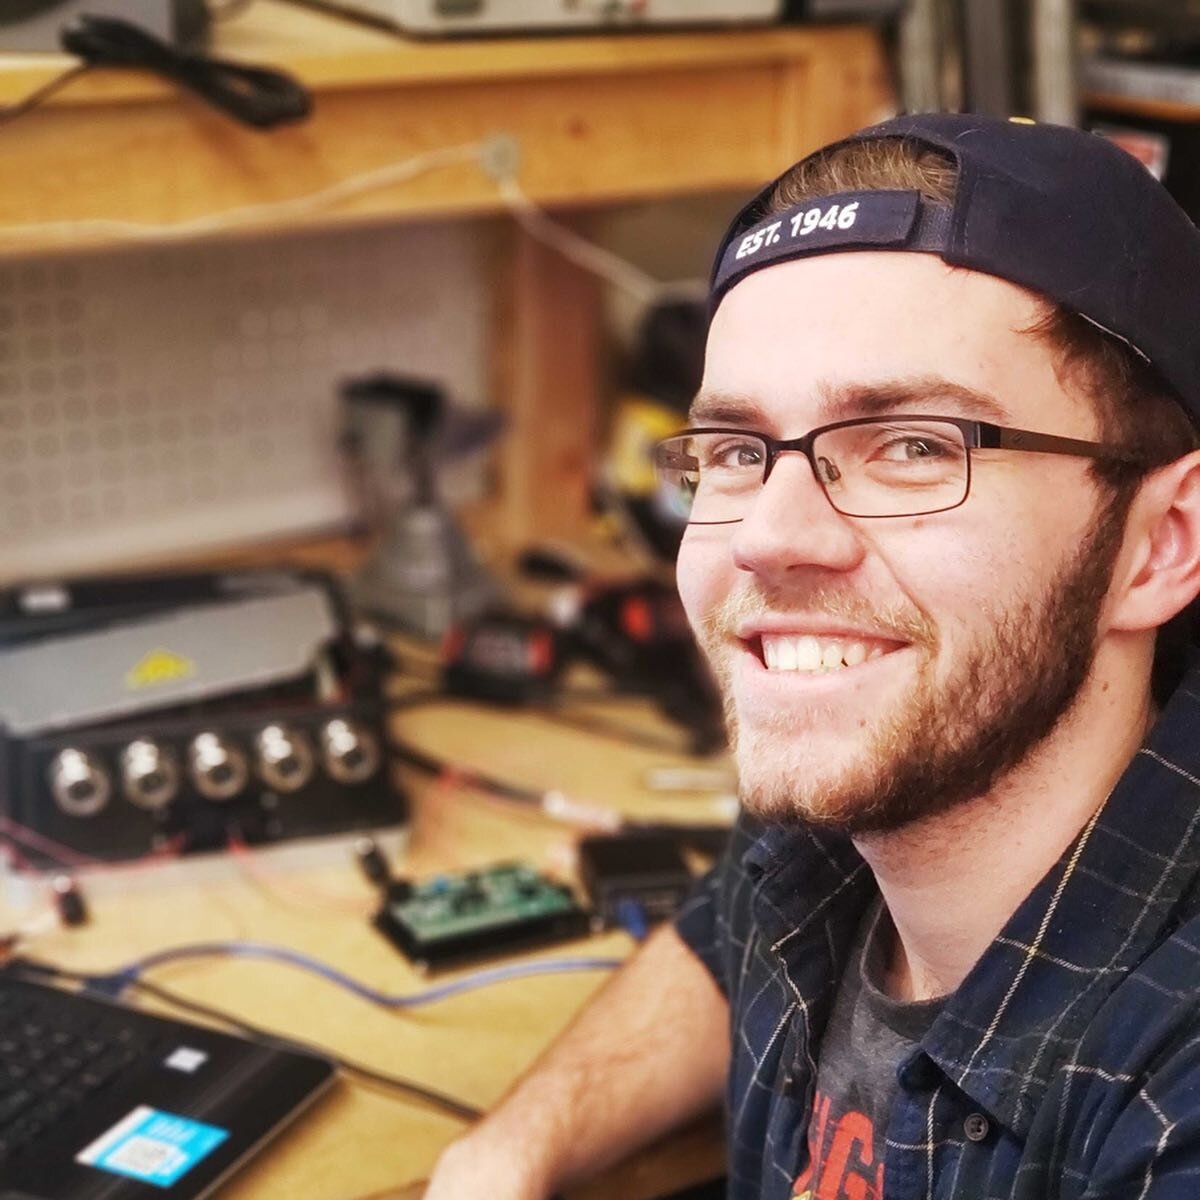 For our team member spotlight this week, we&rsquo;d like to introduce our old Drivetrain Lead Michael Knese. He&rsquo;s from St. Louis, MO and is a Junior in ECE. He likes power tools and is a diehard Blues fan.